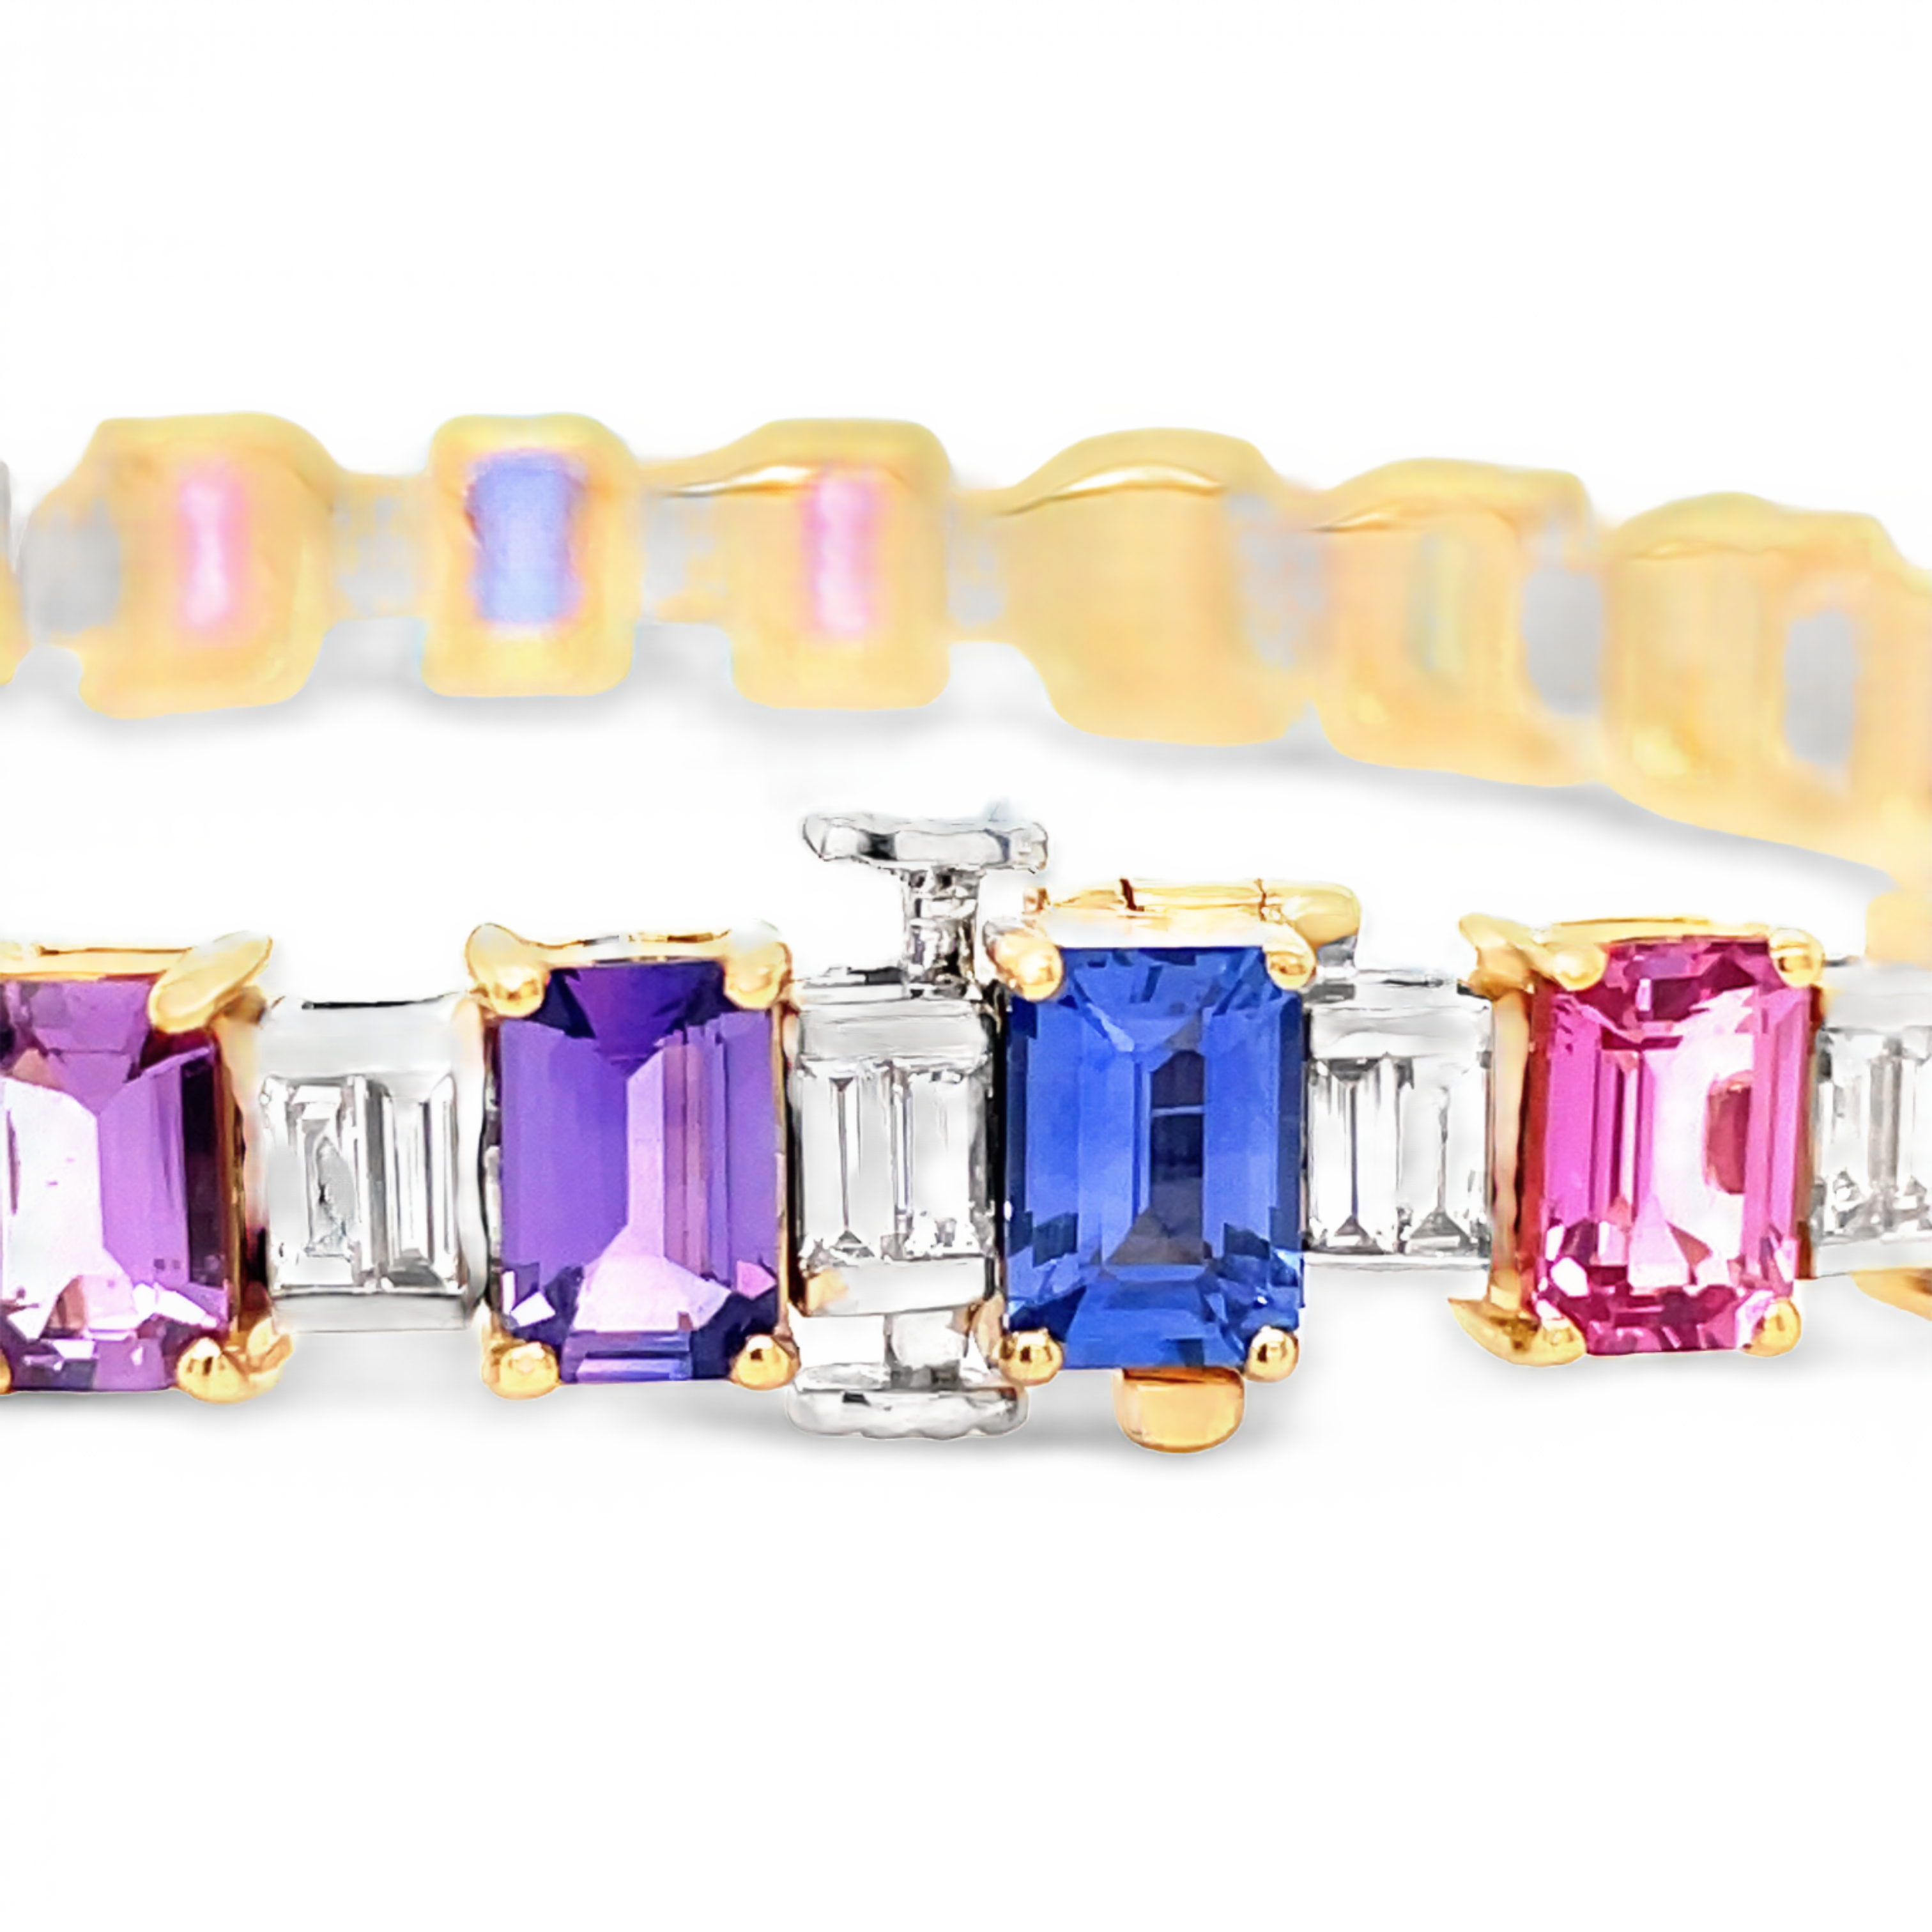 18 yellow gold  Italian made  Sapphire colors ranging from orange, yellow, green, purple, blue & pink  Emerald cut sapphires 16.72 cts  Emerald cut diamonds 2.08 cts   7" long  6.30 mm wide  Gallery finish